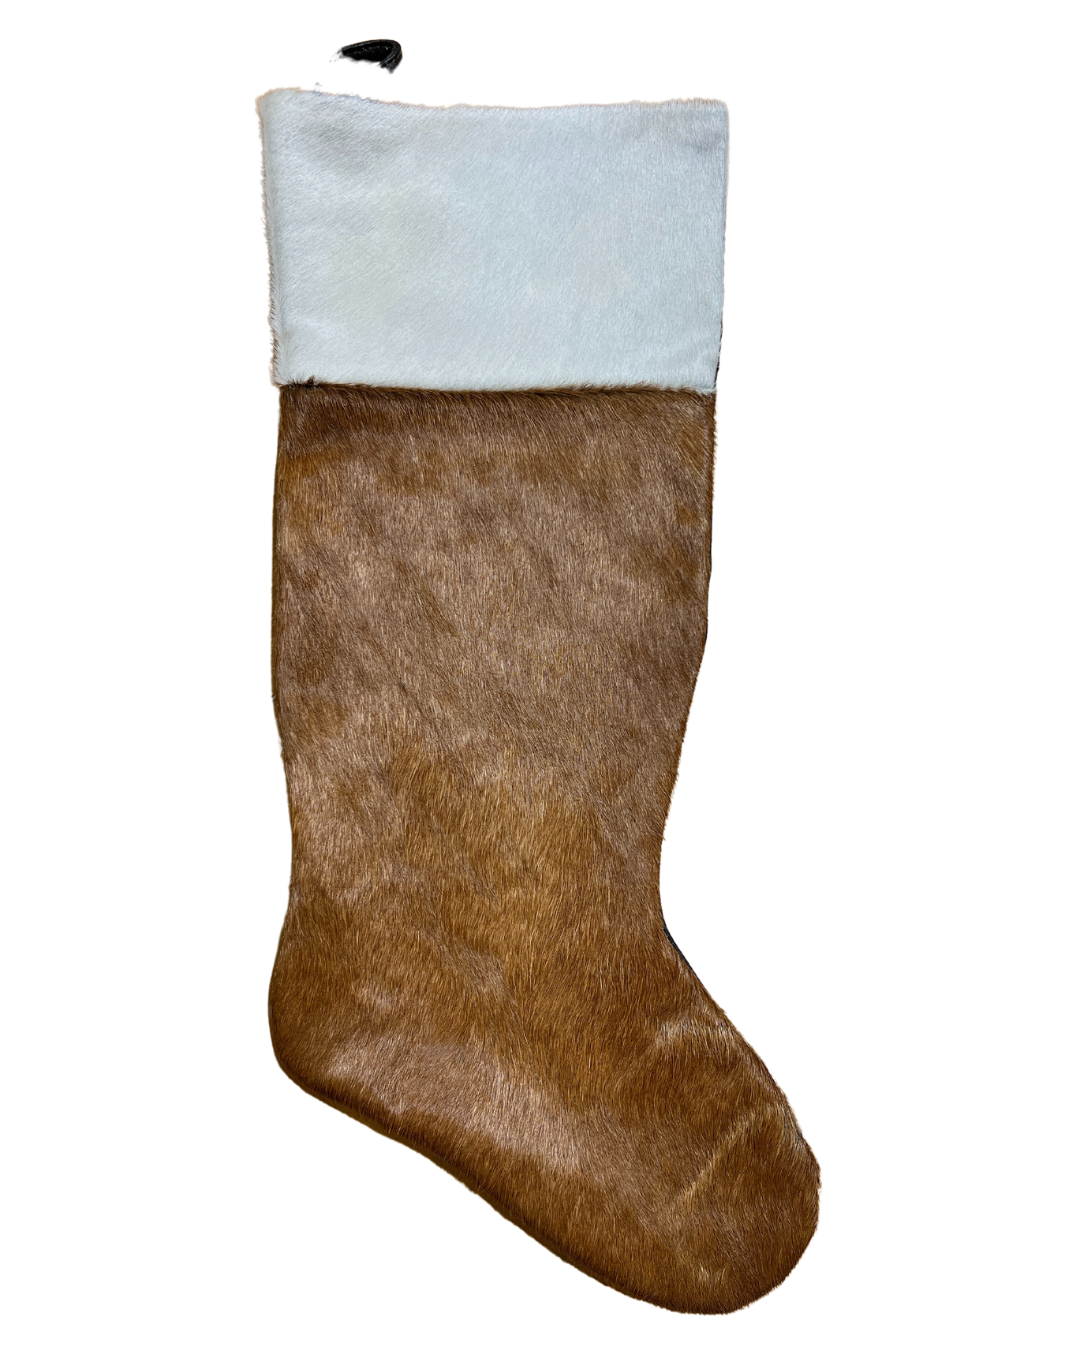 Cowhide Christmas Stocking - Tricolor & White - Large